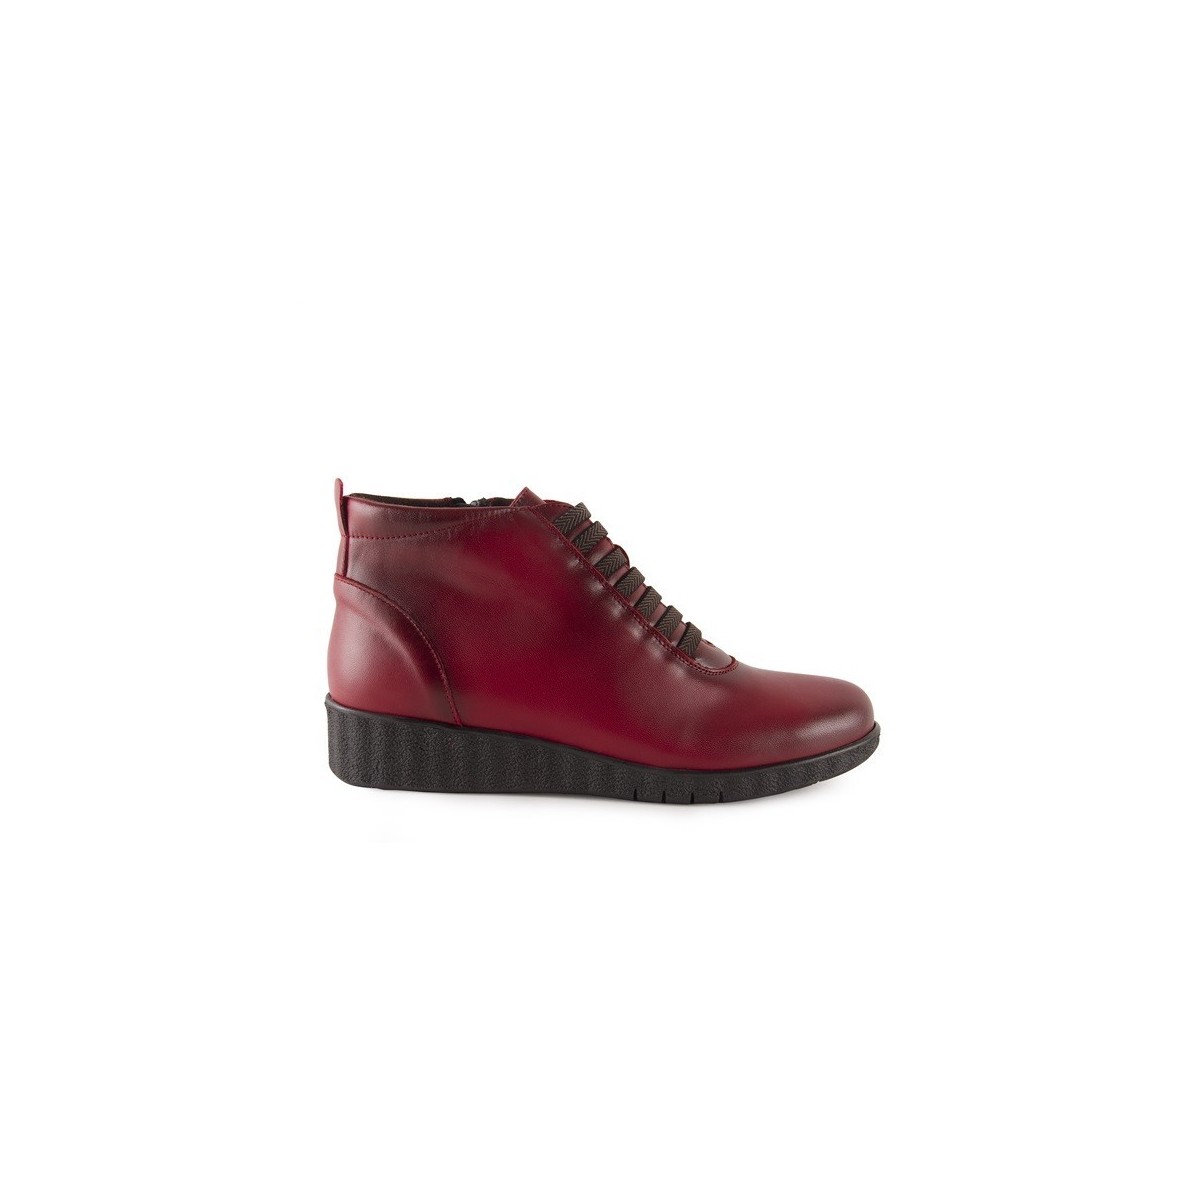 Red leather wedge ankle boots by Chamby